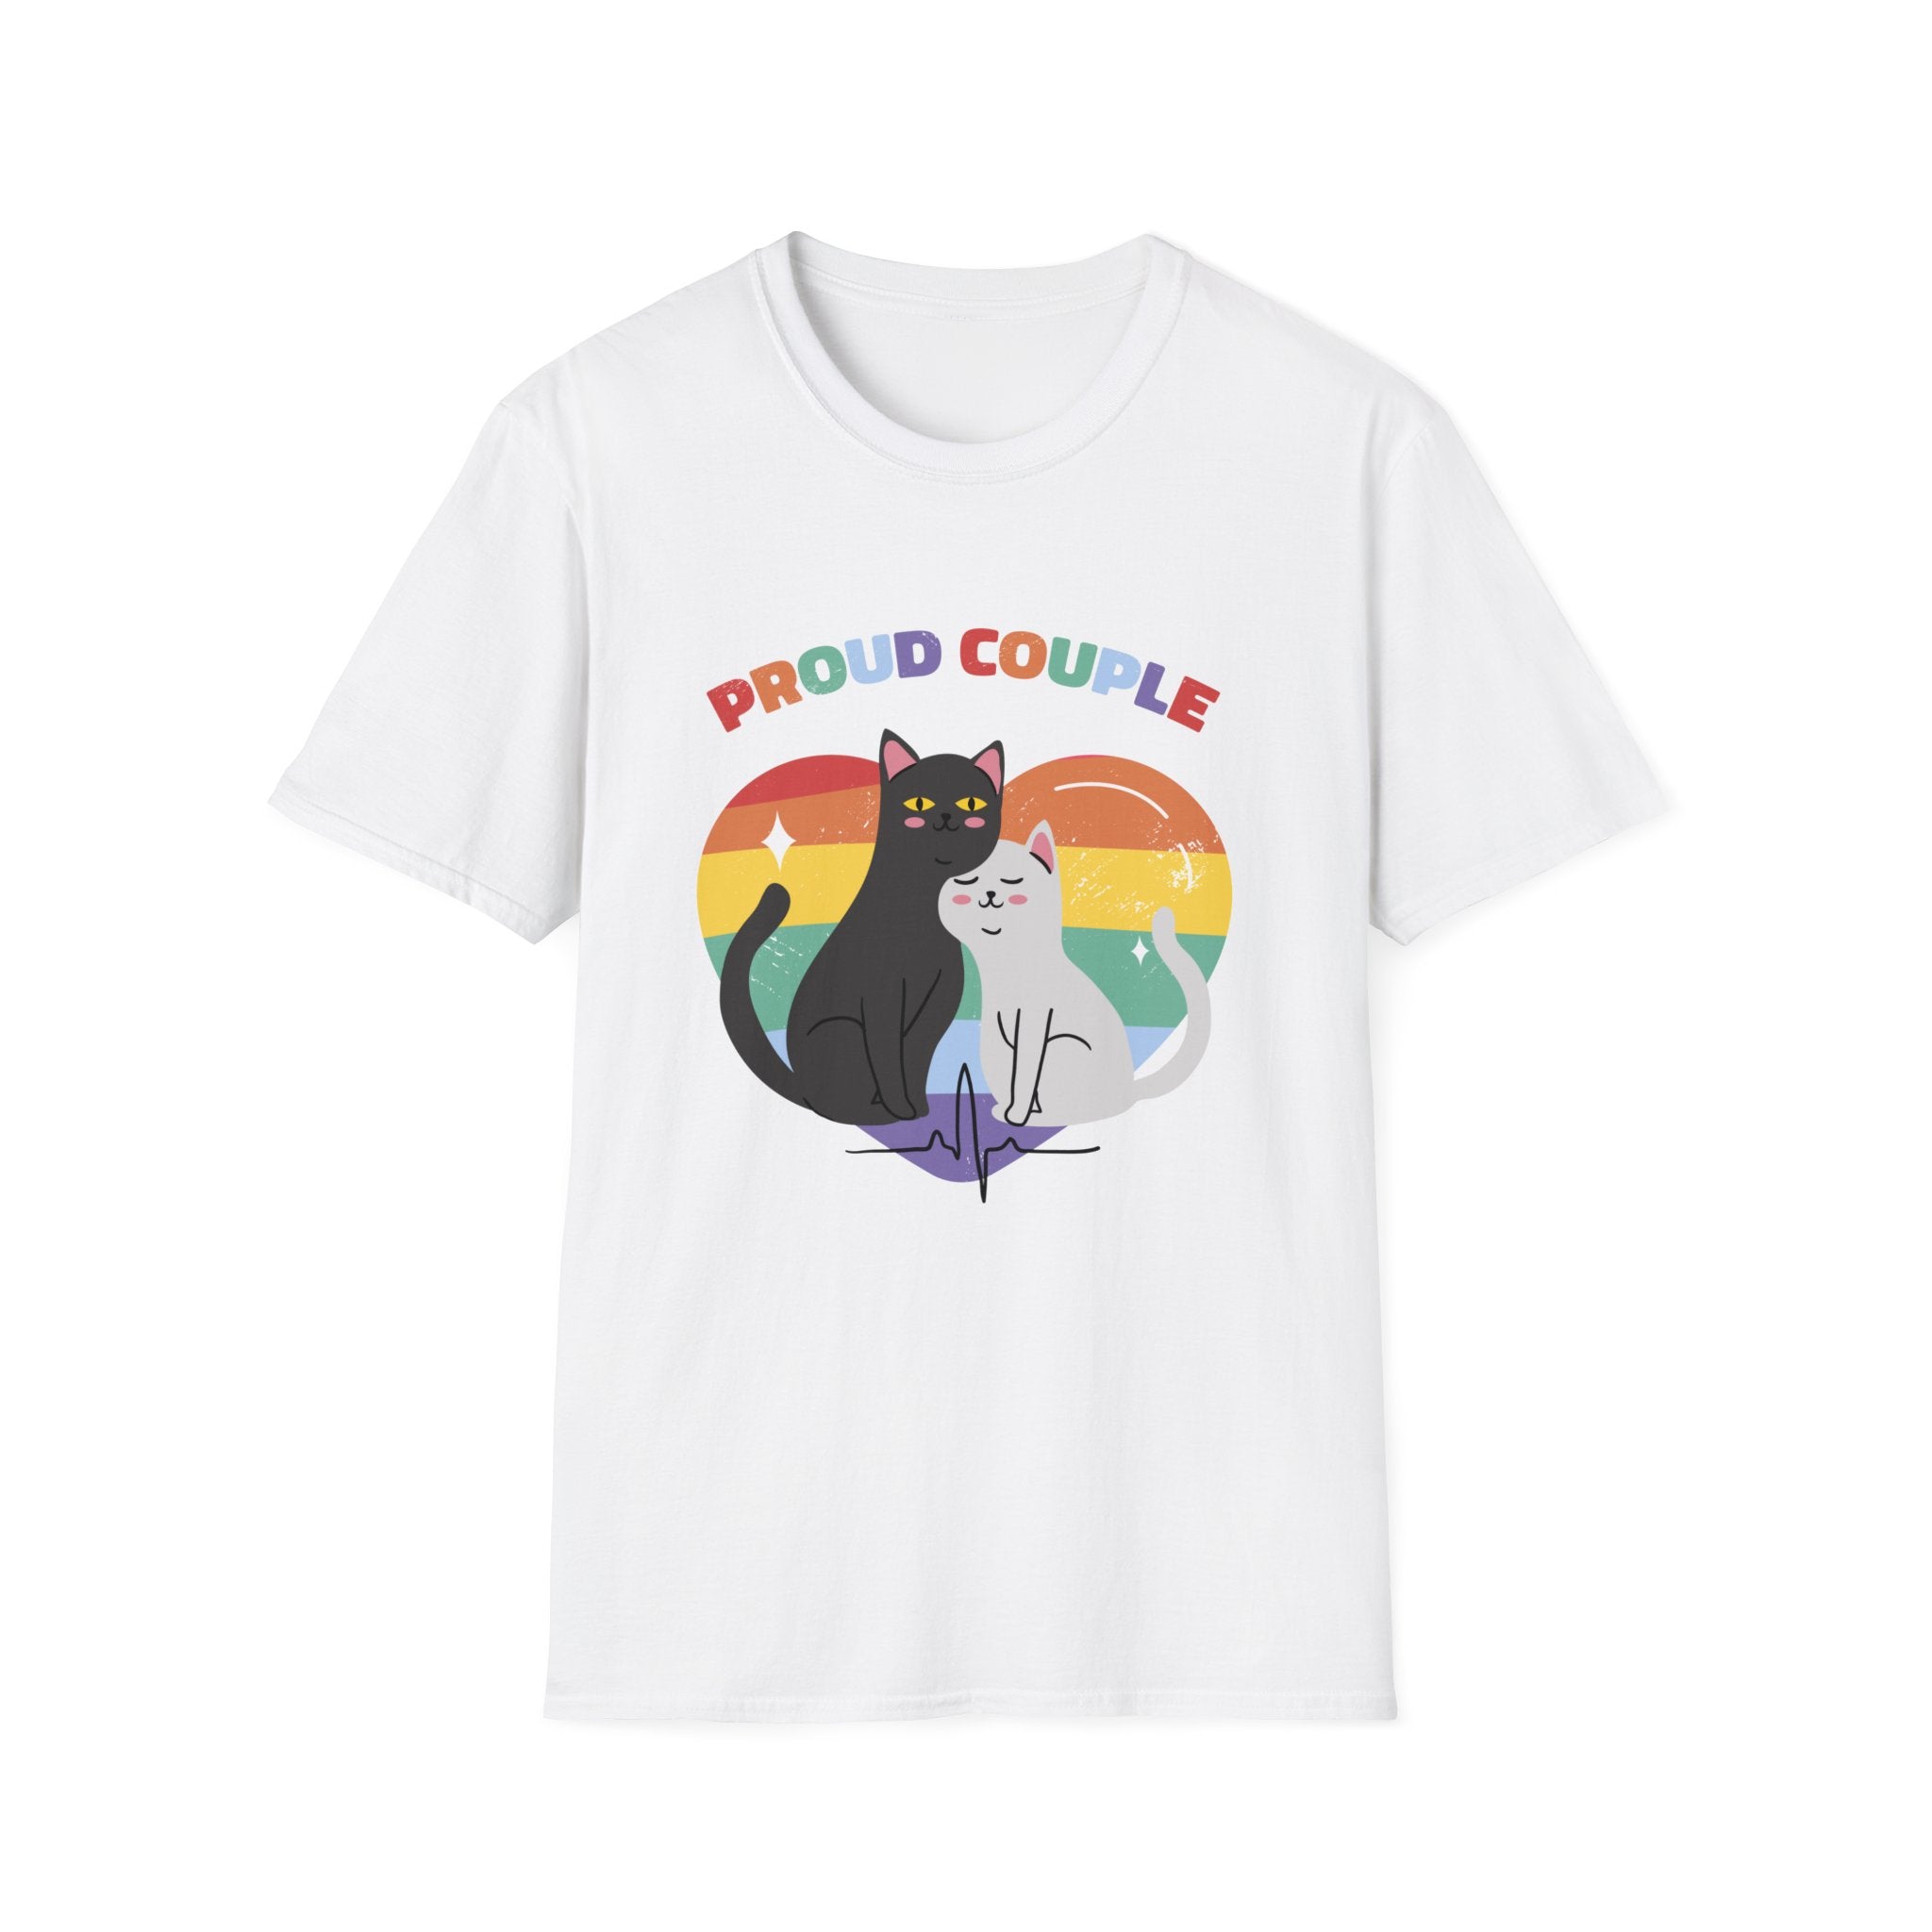 Proud Couple of Cats T-Shirt